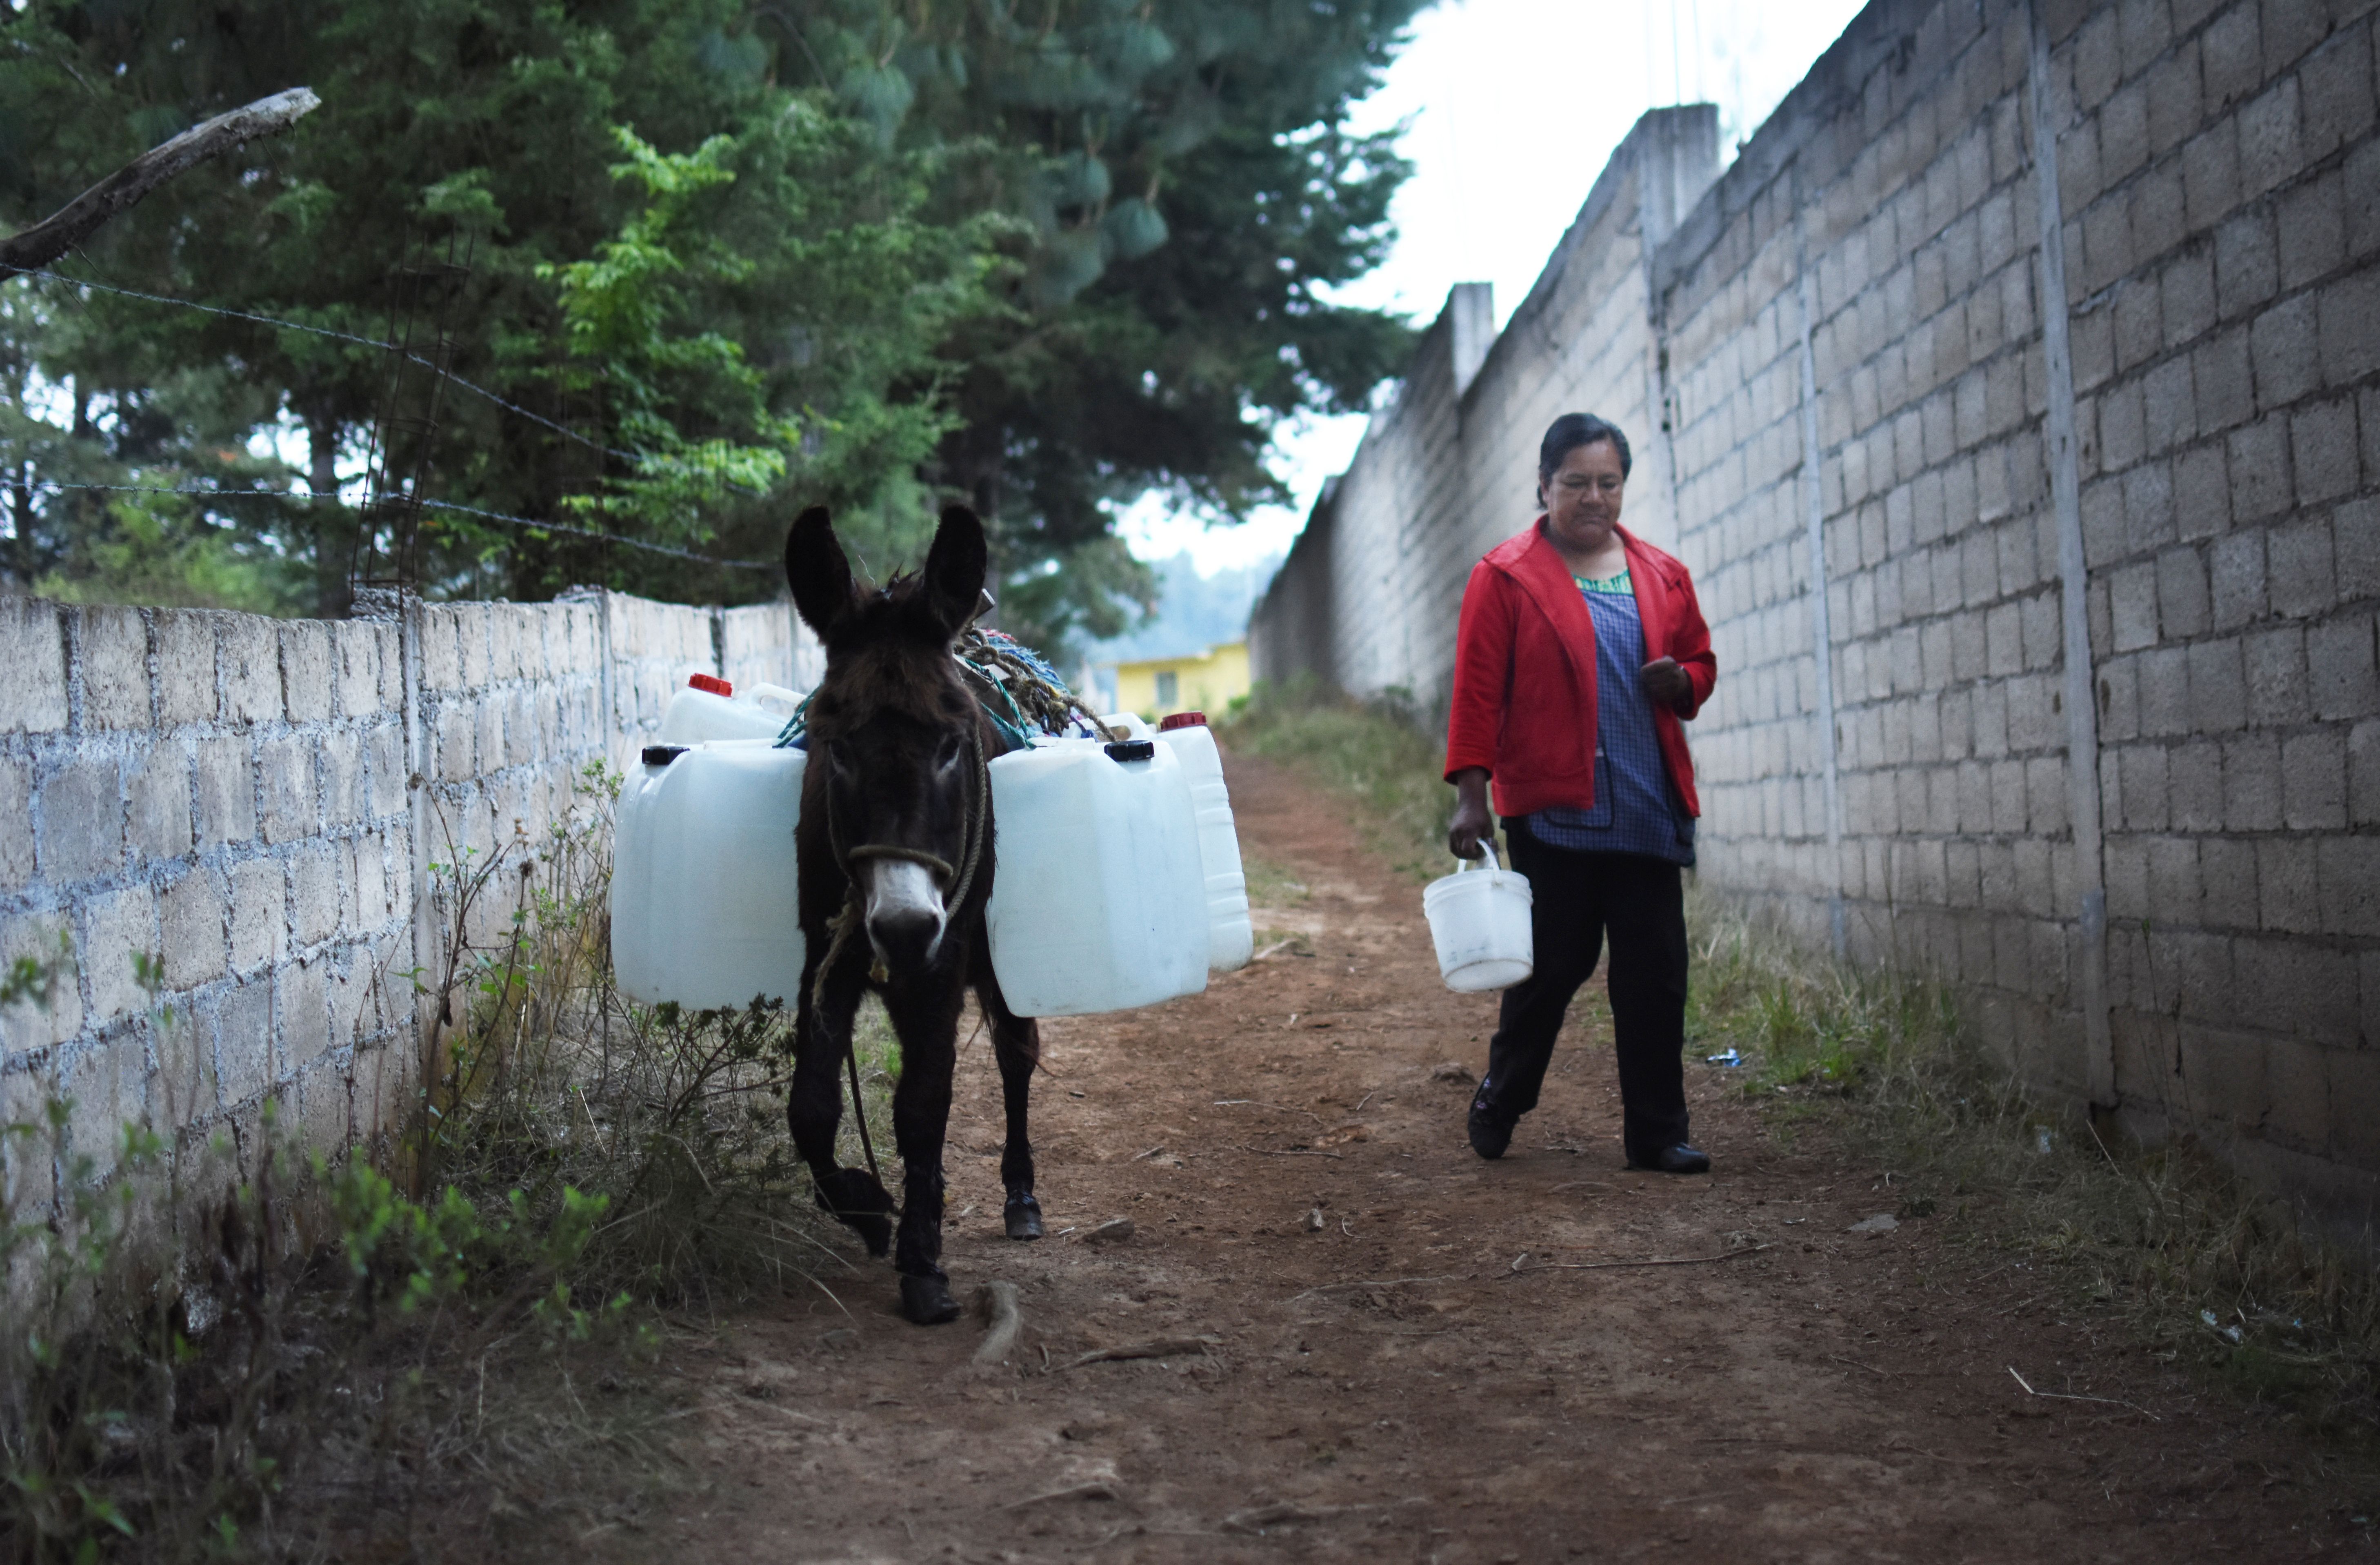 Maria Isabel takes a donkey to collect water every morning. She wakes up at 6:30 am to gather water, make breakfast and then walk her daughter to school. “If I do not go and get water, I cannot bathe, I cannot drink, I cannot use water to make food,” she said. Image by Meg Vatterott. Mexico, 2018.